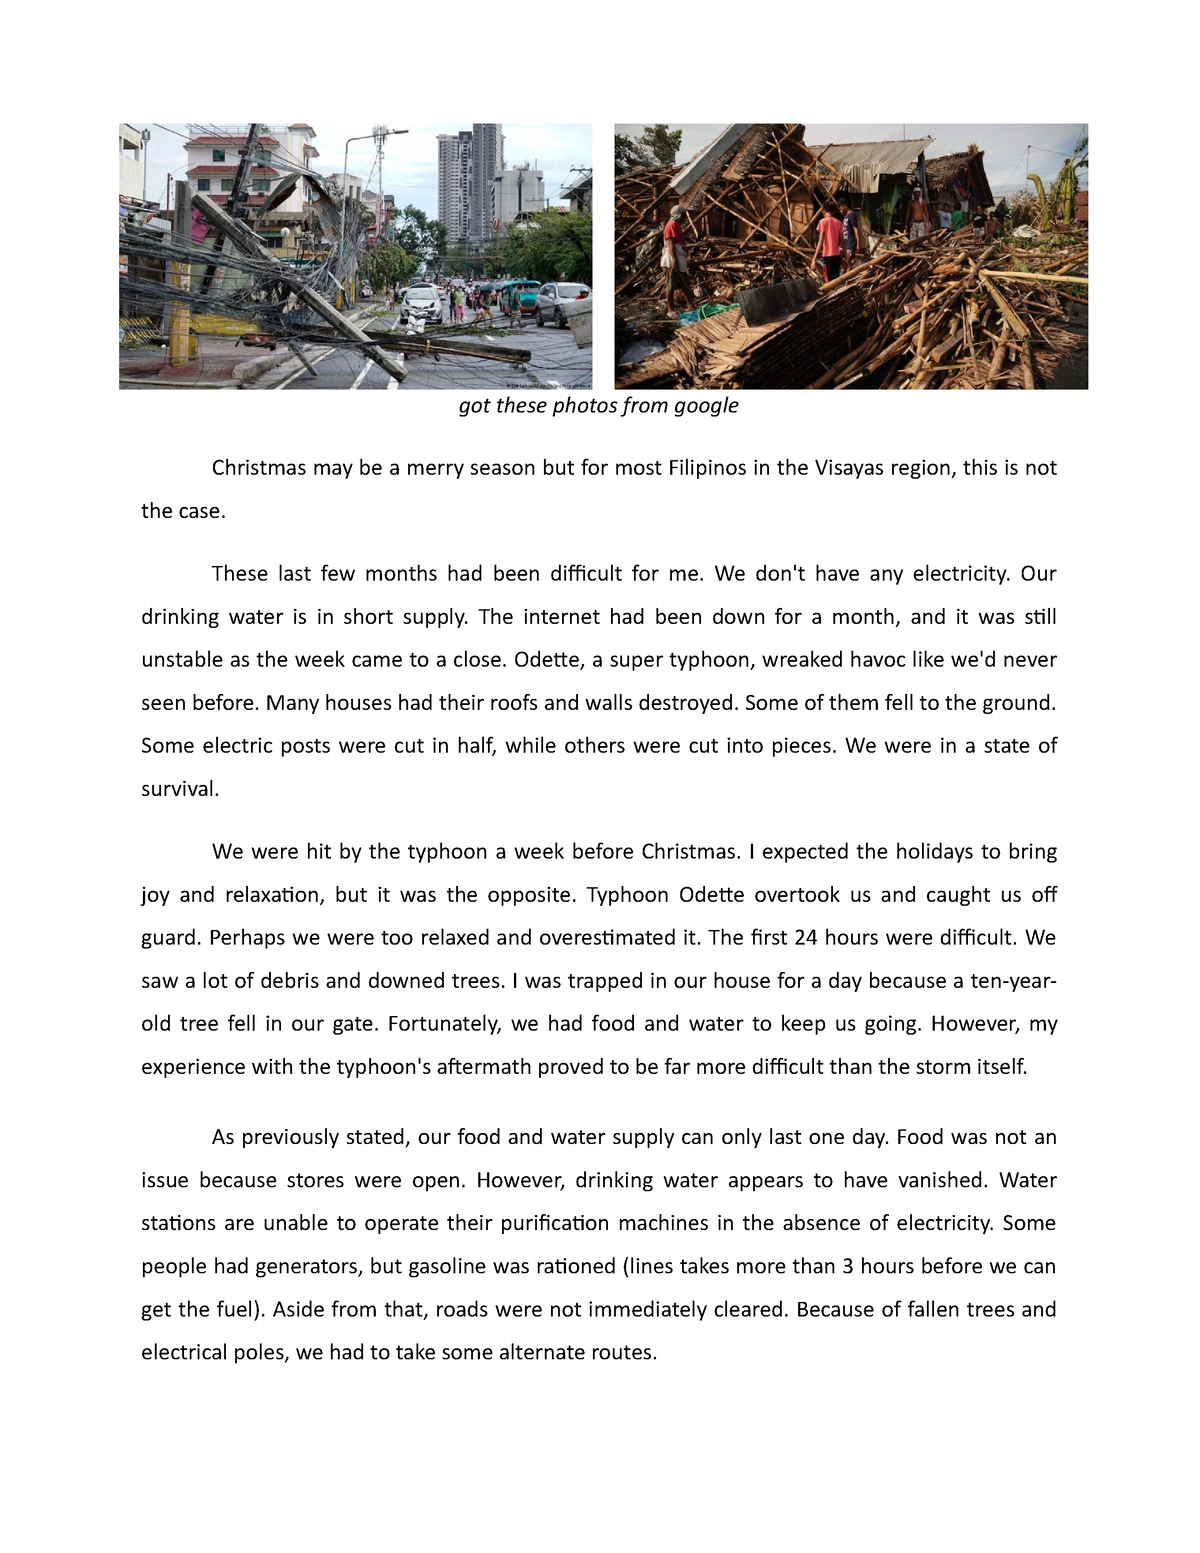 write an essay about your experience during the typhoon odette